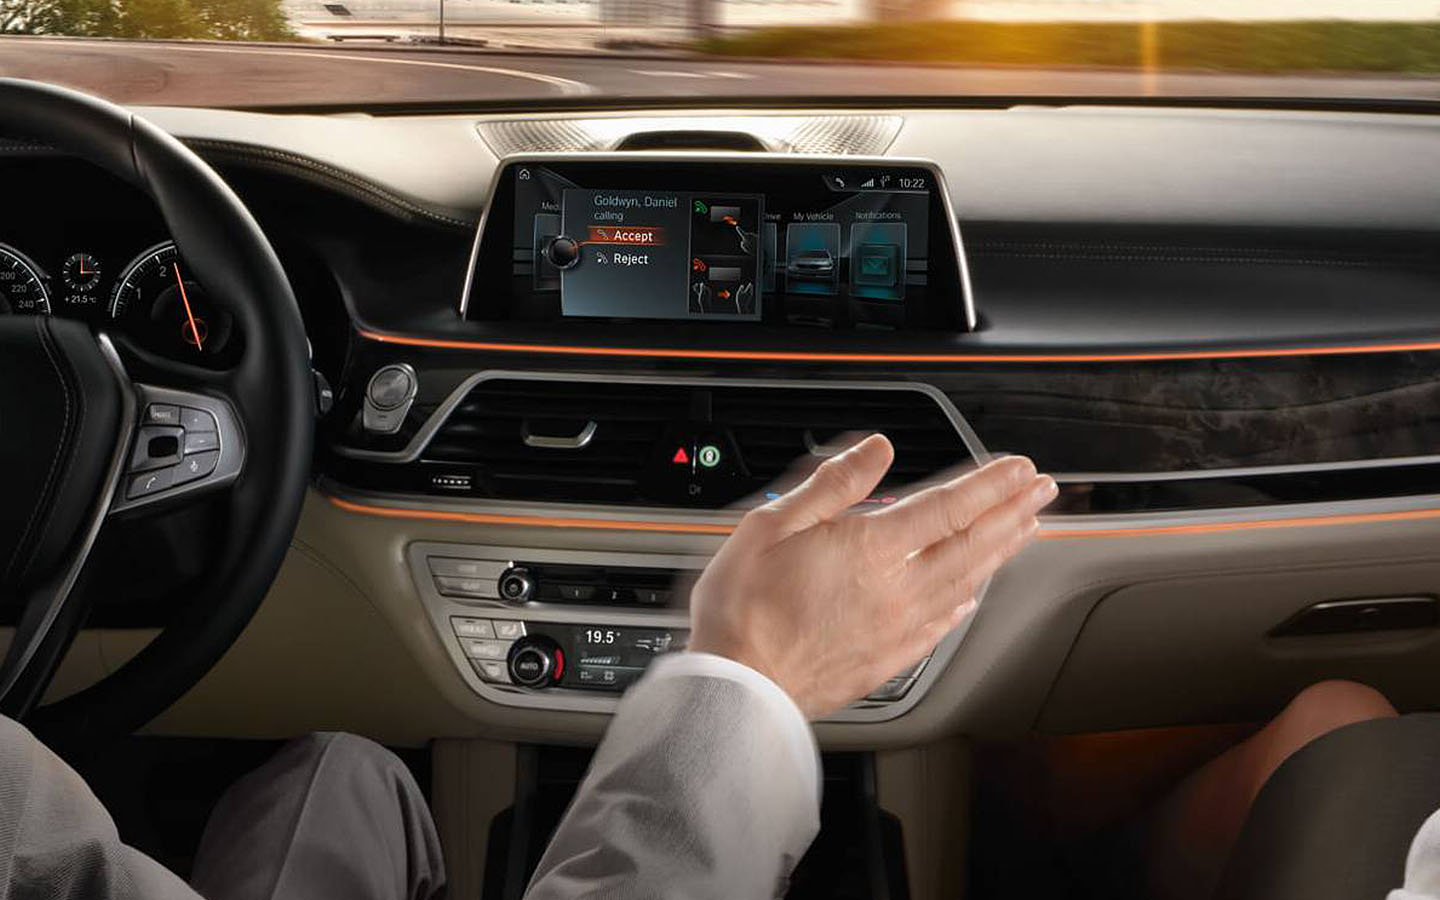 Let’s go through BMW gesture control features  